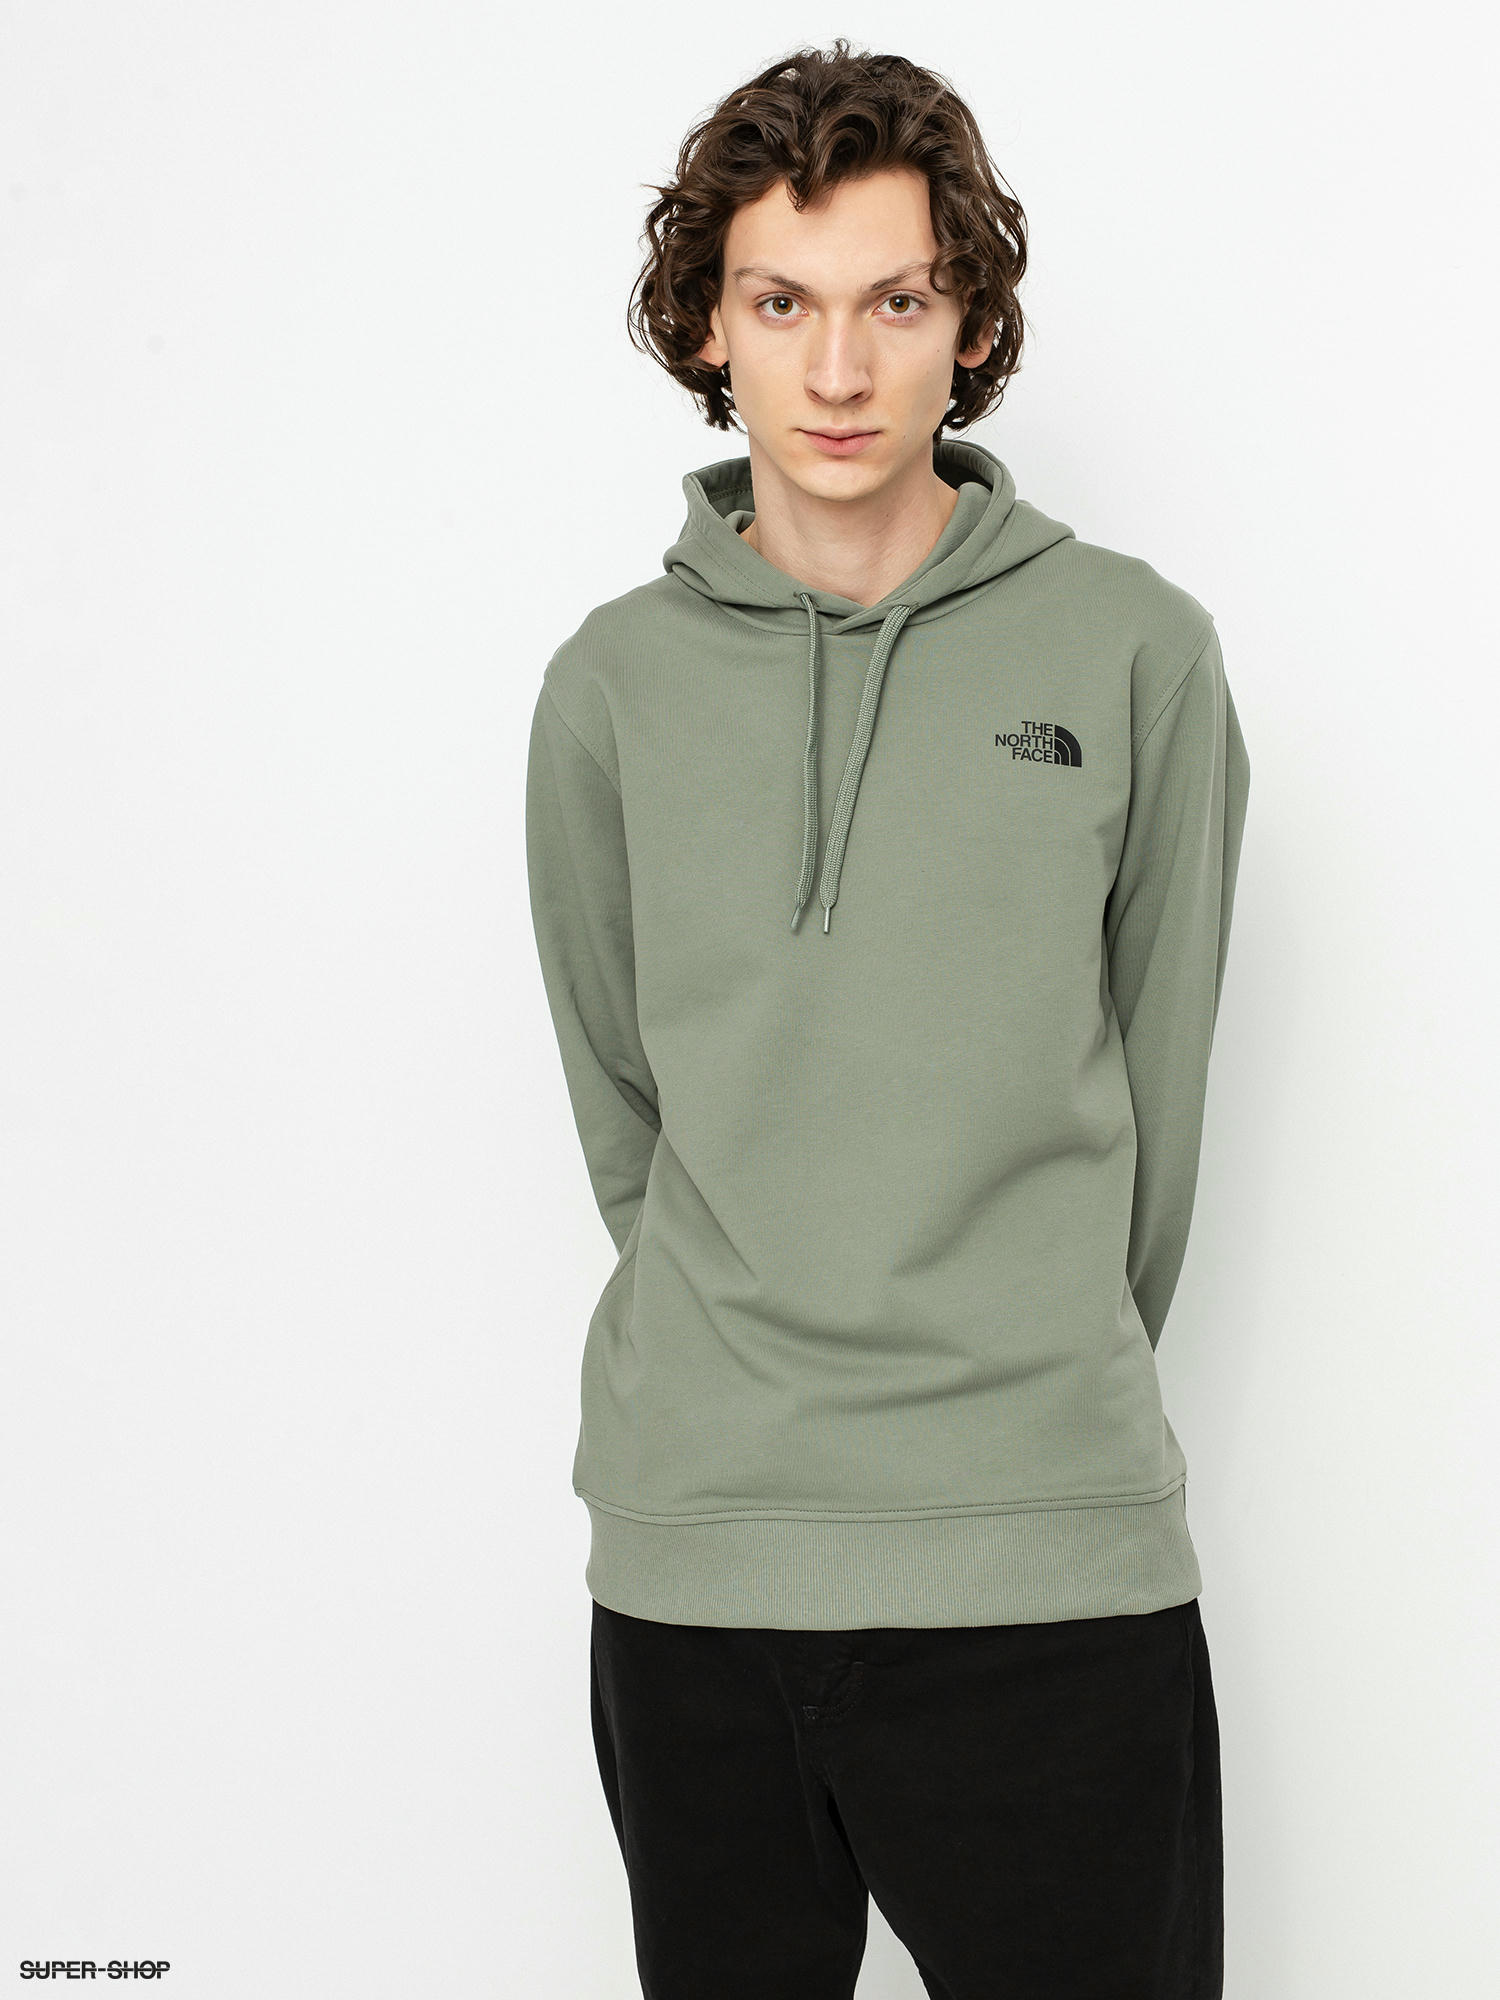 reservation function Eat dinner The North Face Seasonal Drew Peak Pullover Hoodie Netherlands, SAVE 51% -  aveclumiere.com